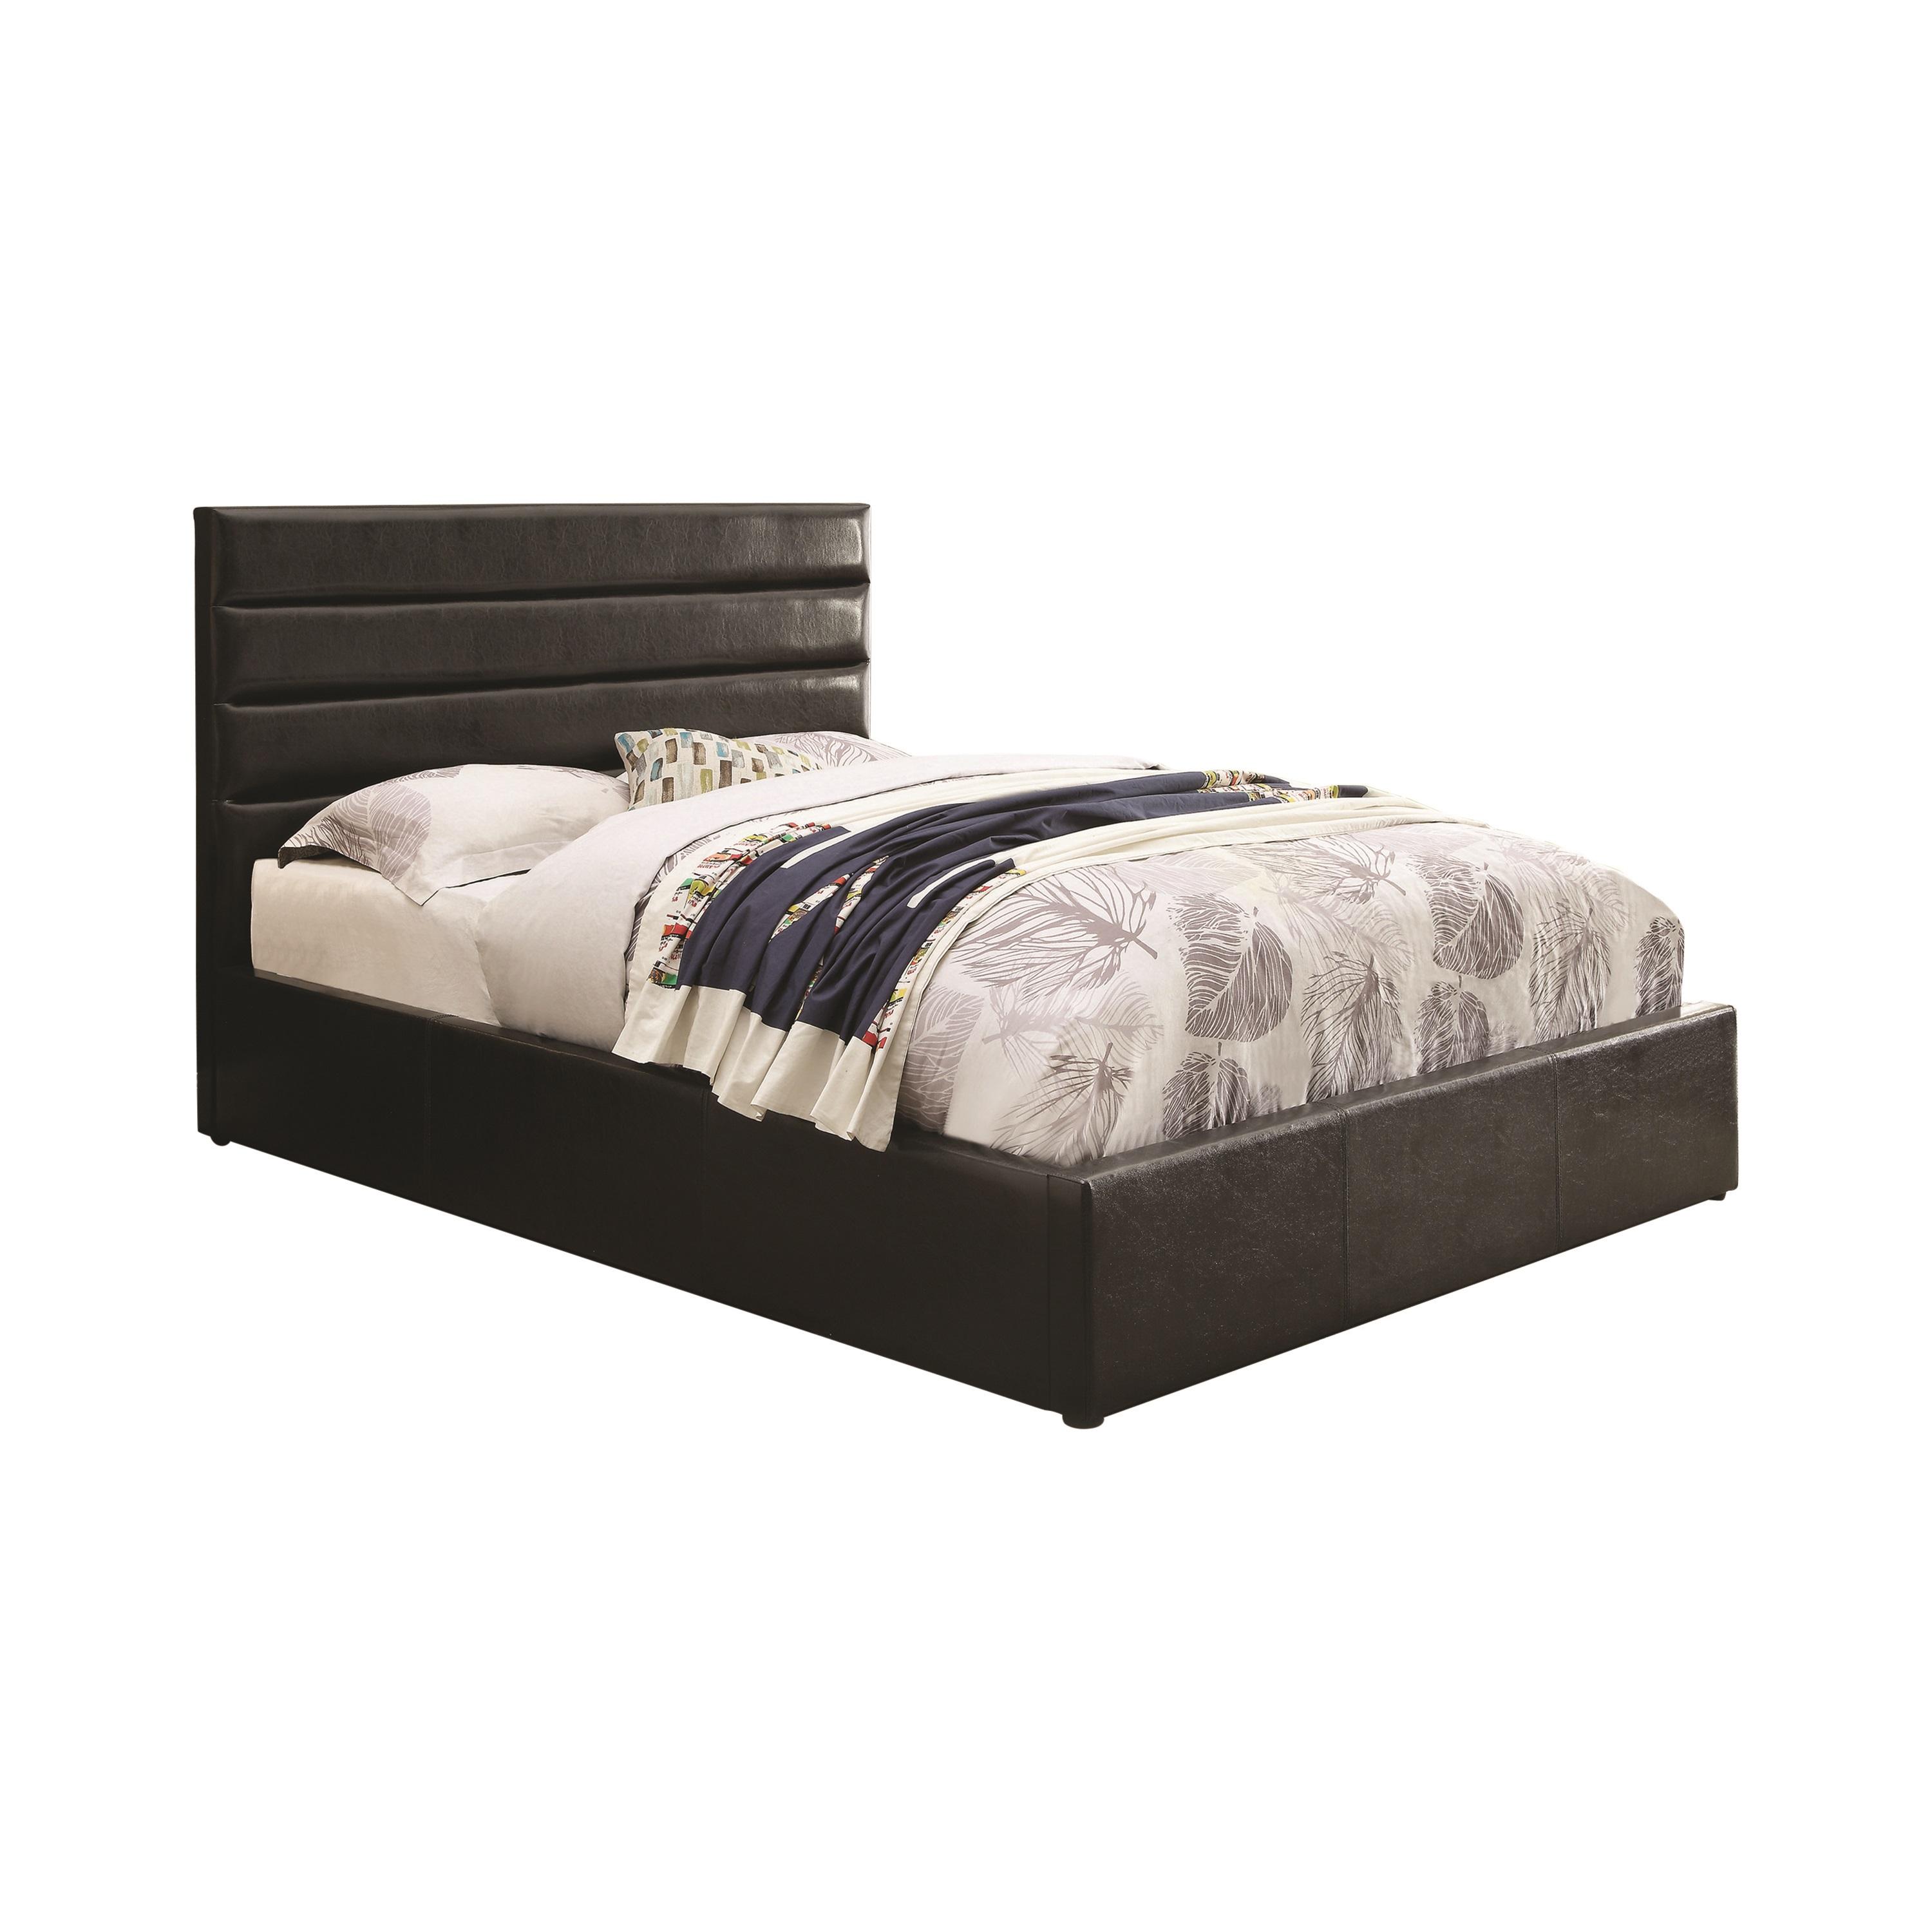 Contemporary Bed 300469Q Riverbend 300469Q in Black Leatherette